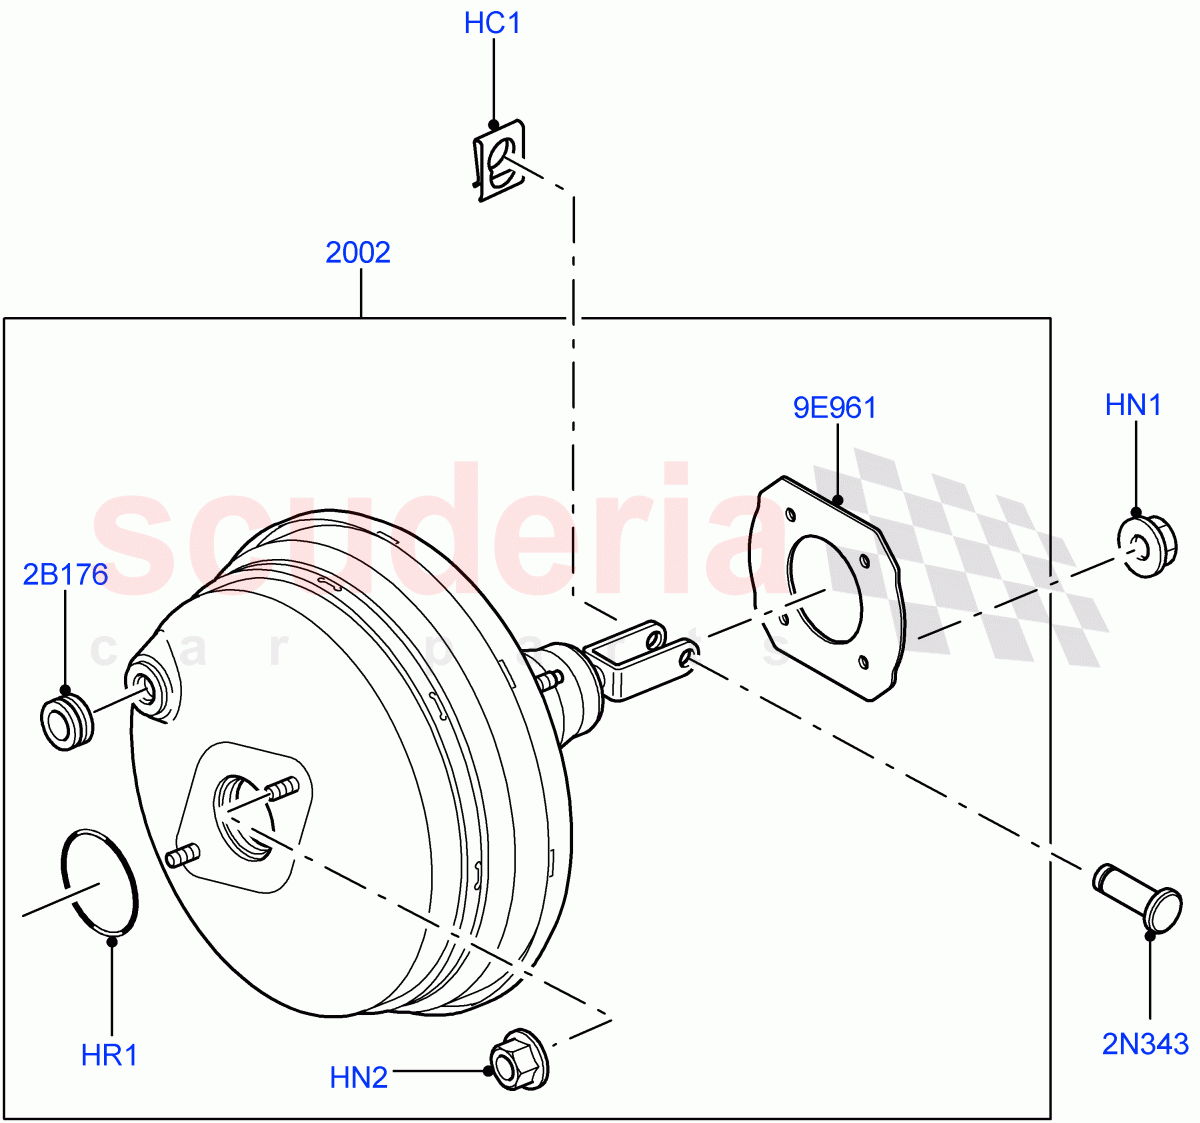 Brake Booster((V)FROMAA000001) of Land Rover Land Rover Discovery 4 (2010-2016) [2.7 Diesel V6]